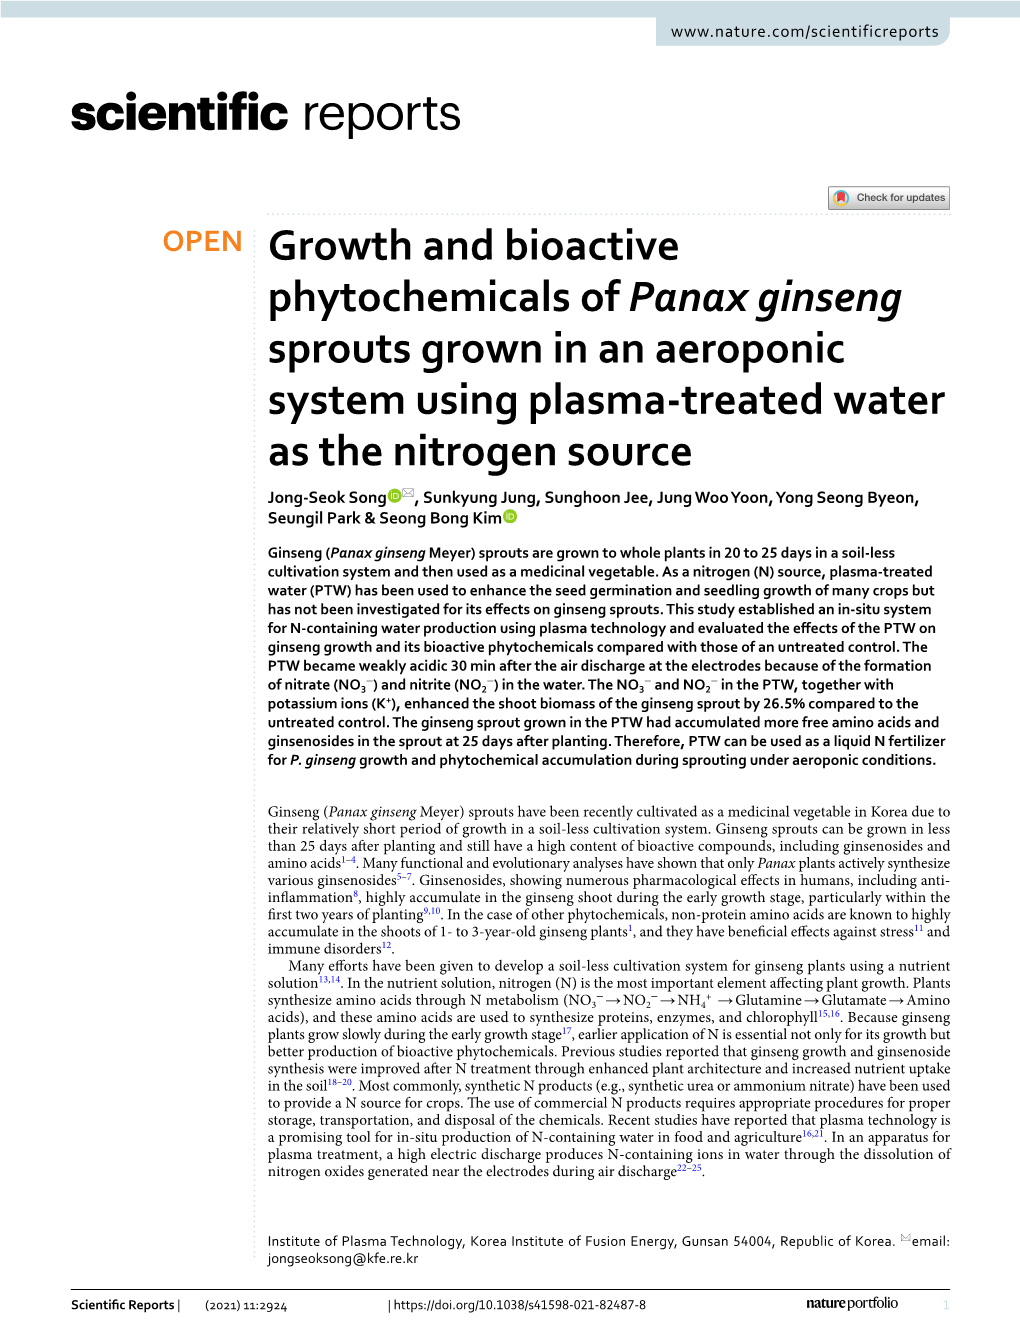 Growth and Bioactive Phytochemicals of Panax Ginseng Sprouts Grown In